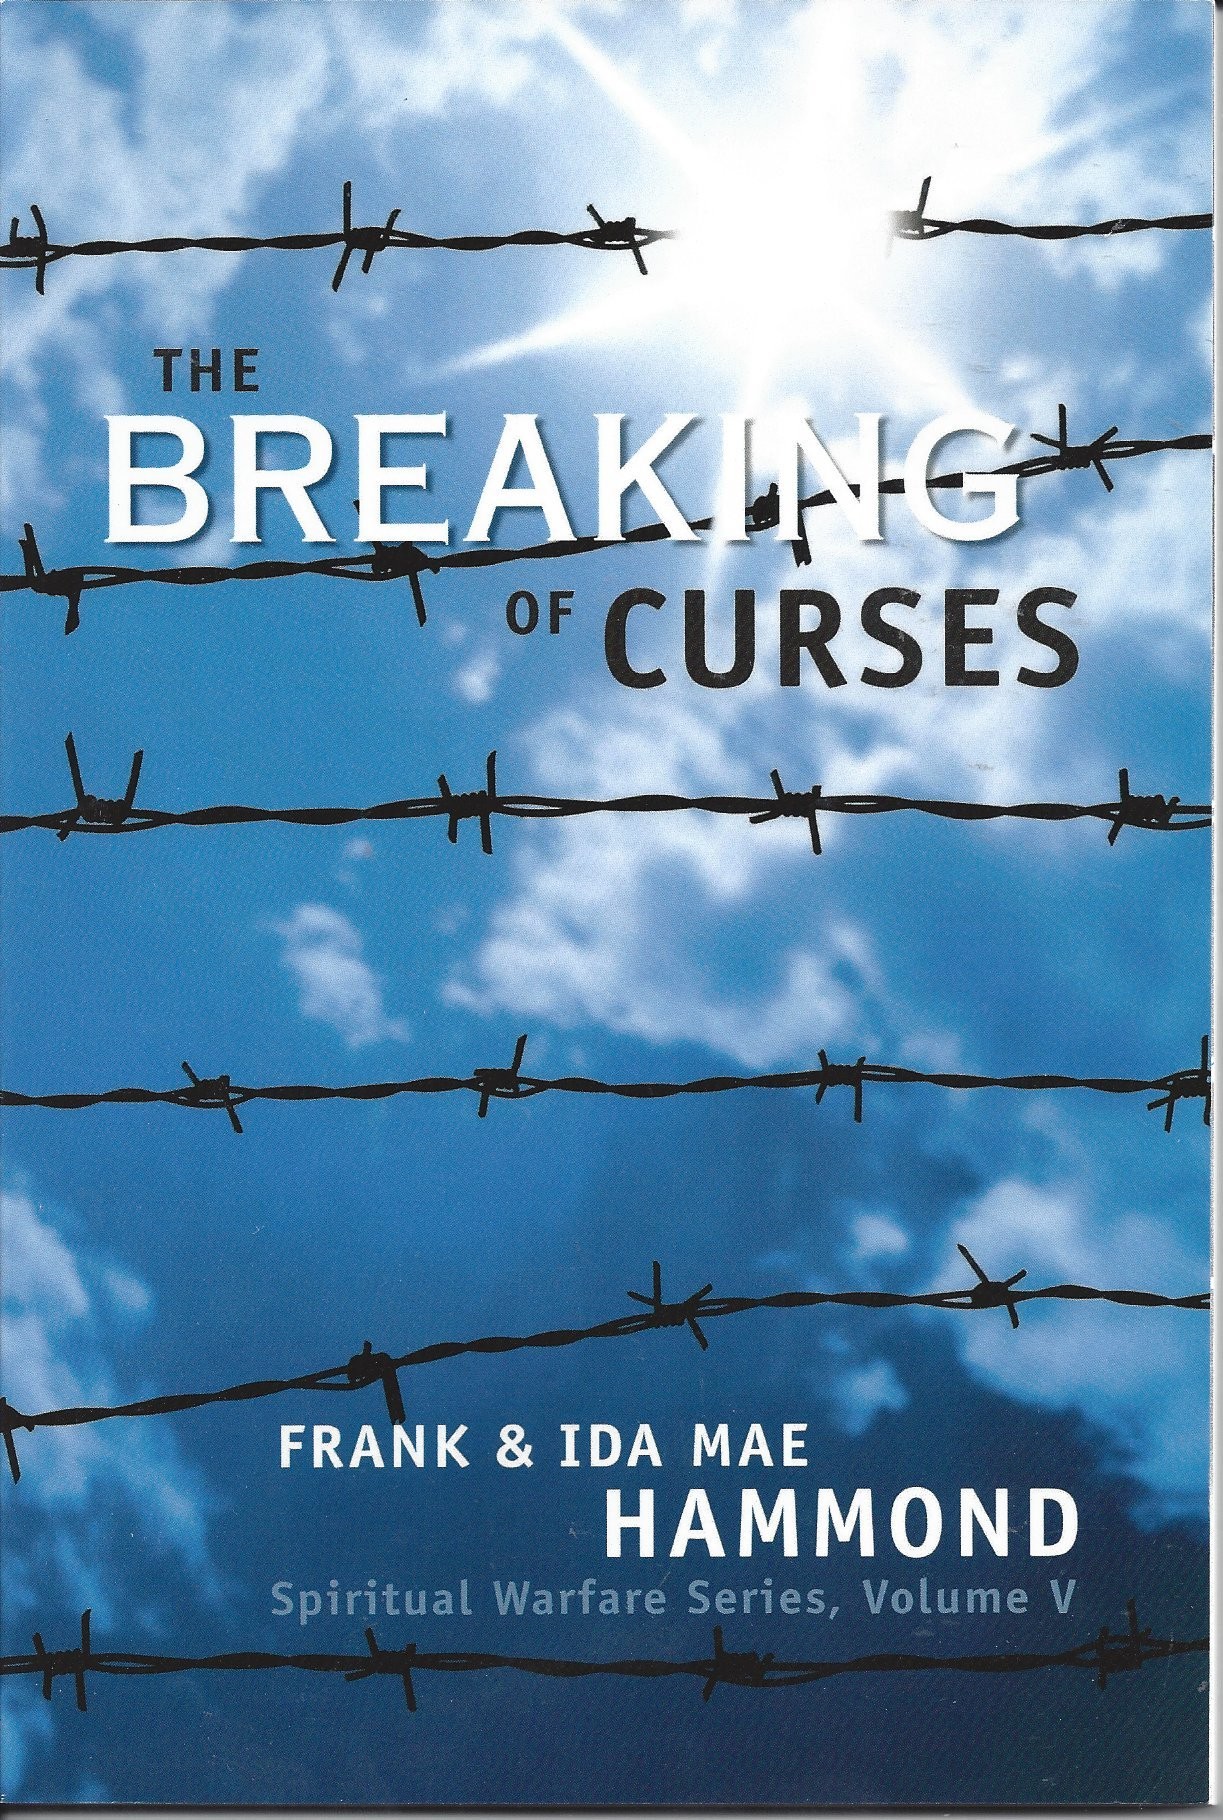 The Breaking Of Curses  (1993)  Front